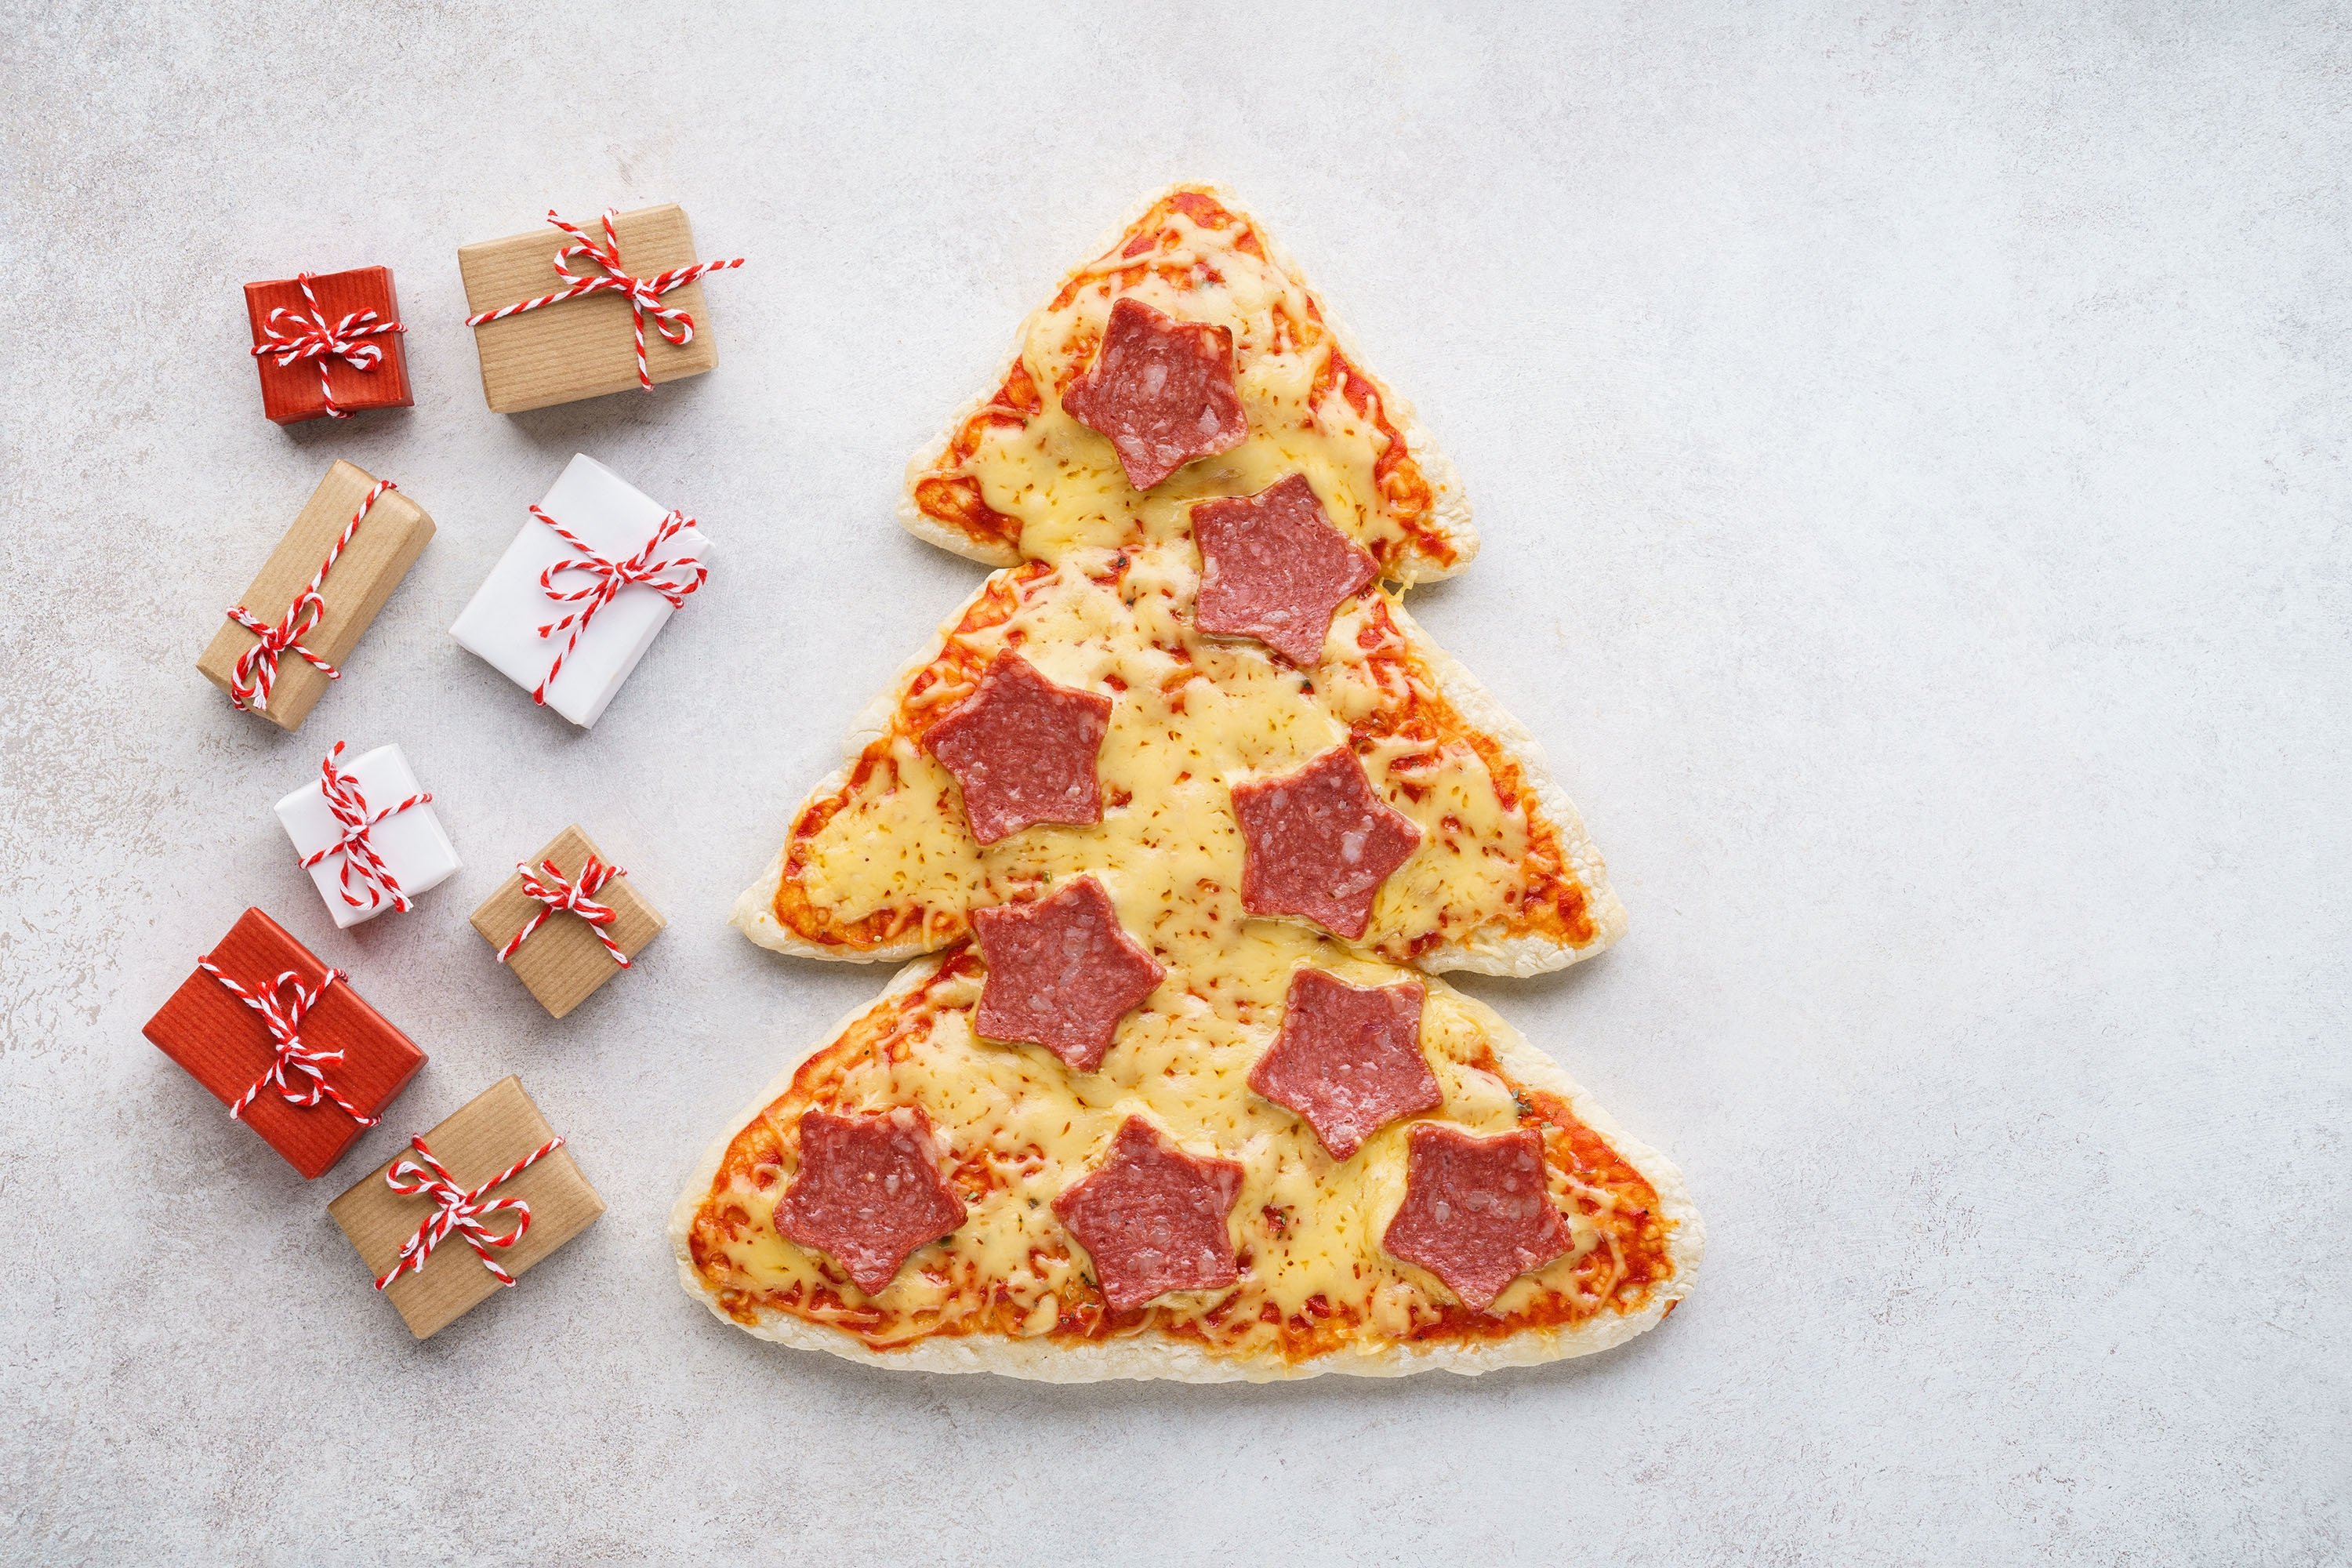 Pepperoni pizza shaped as a Christmas tree and gift boxes. (Shutterstock Photo)